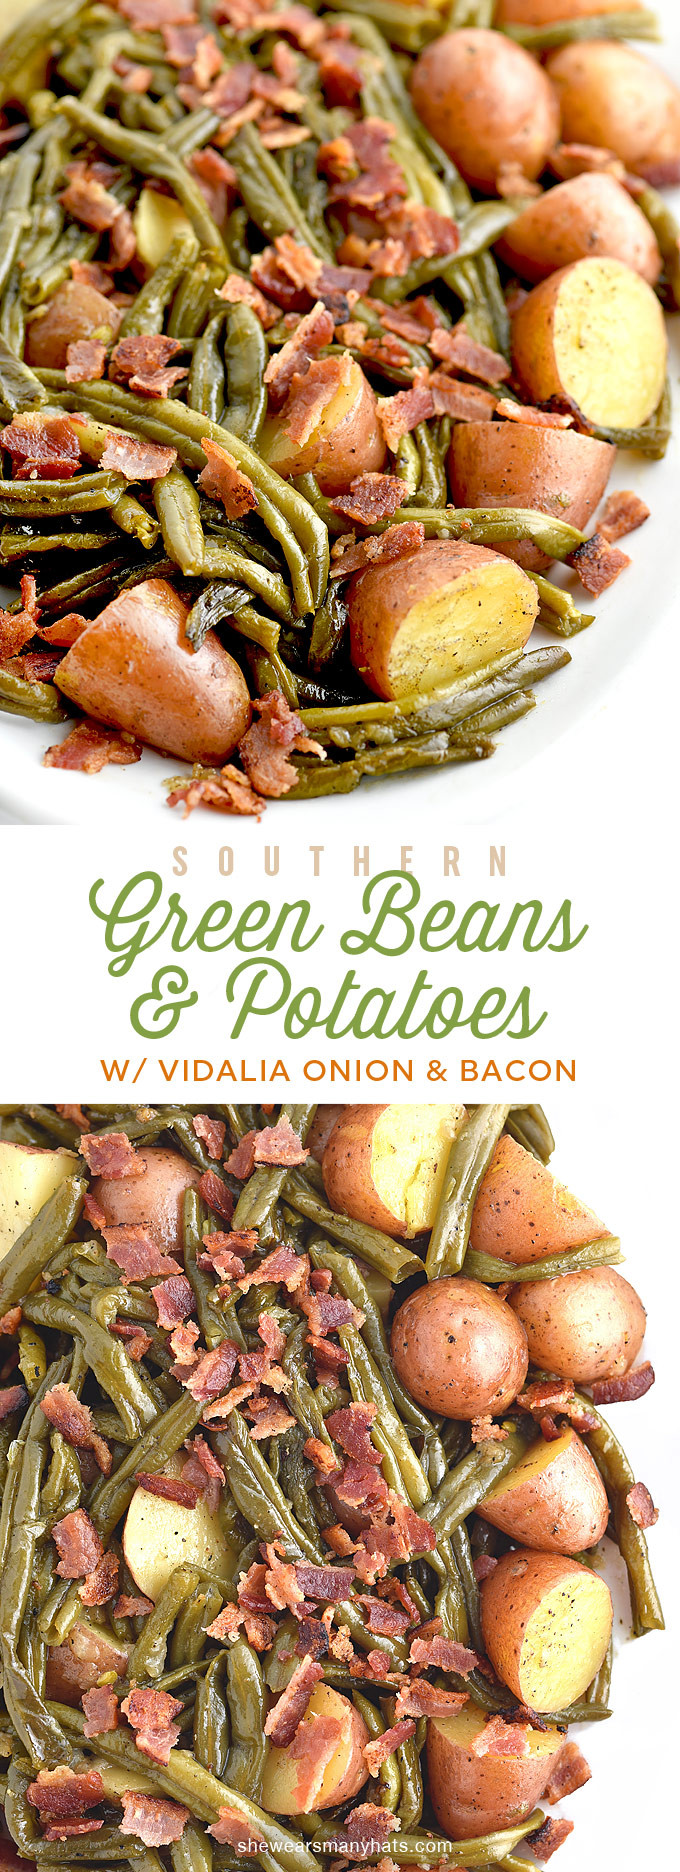 Beans Greens Potatoes
 Southern Green Beans and Potatoes with Vidalia ion and